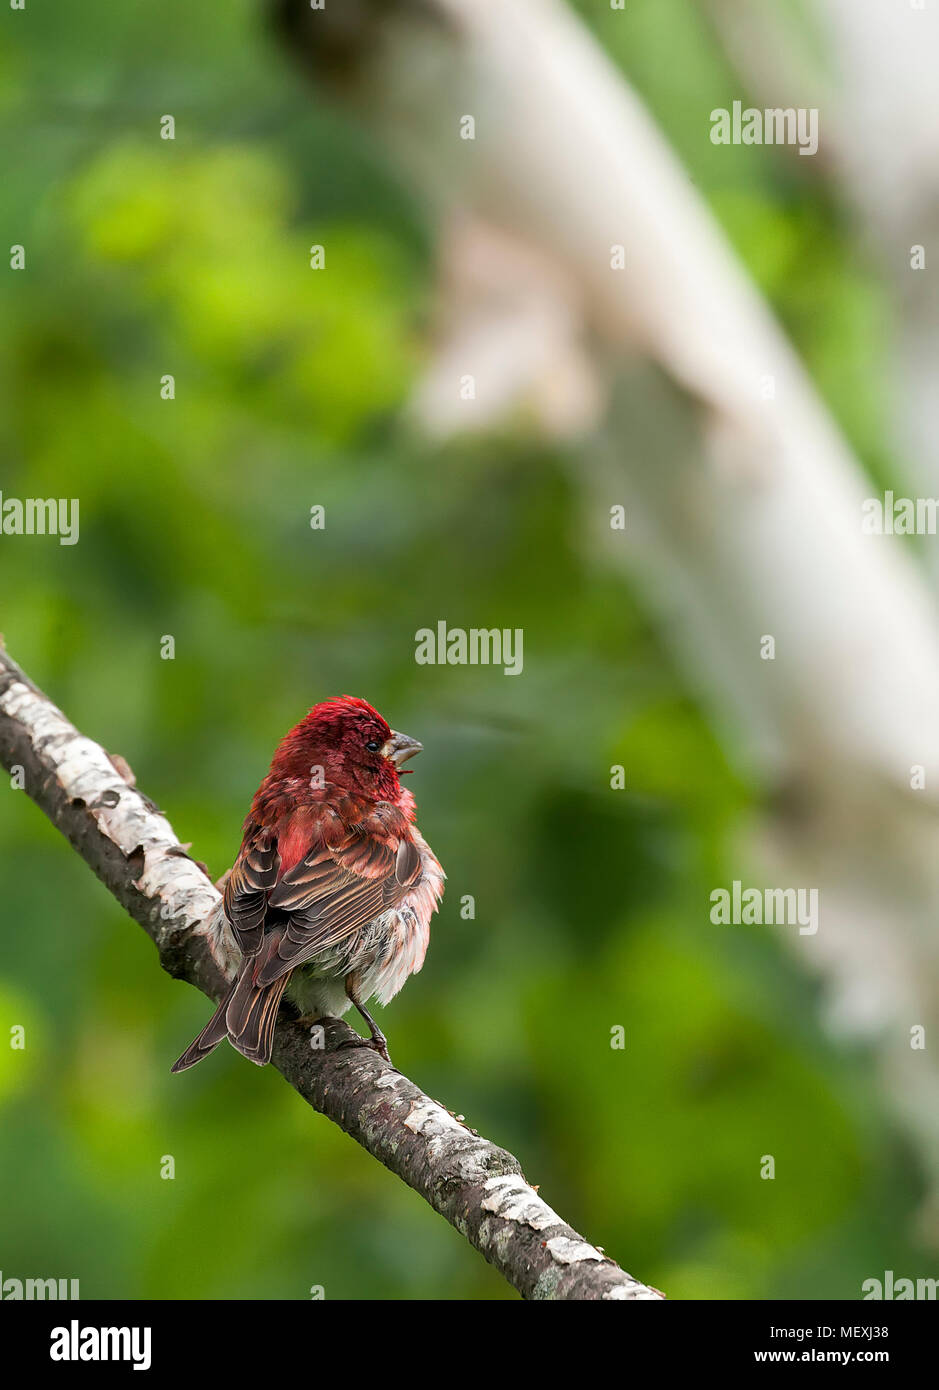 An adult, male Purple Finch, Haemorhous purpureus, is perched on the branch of a White Birch tree in New Hampshire, USA. Stock Photo